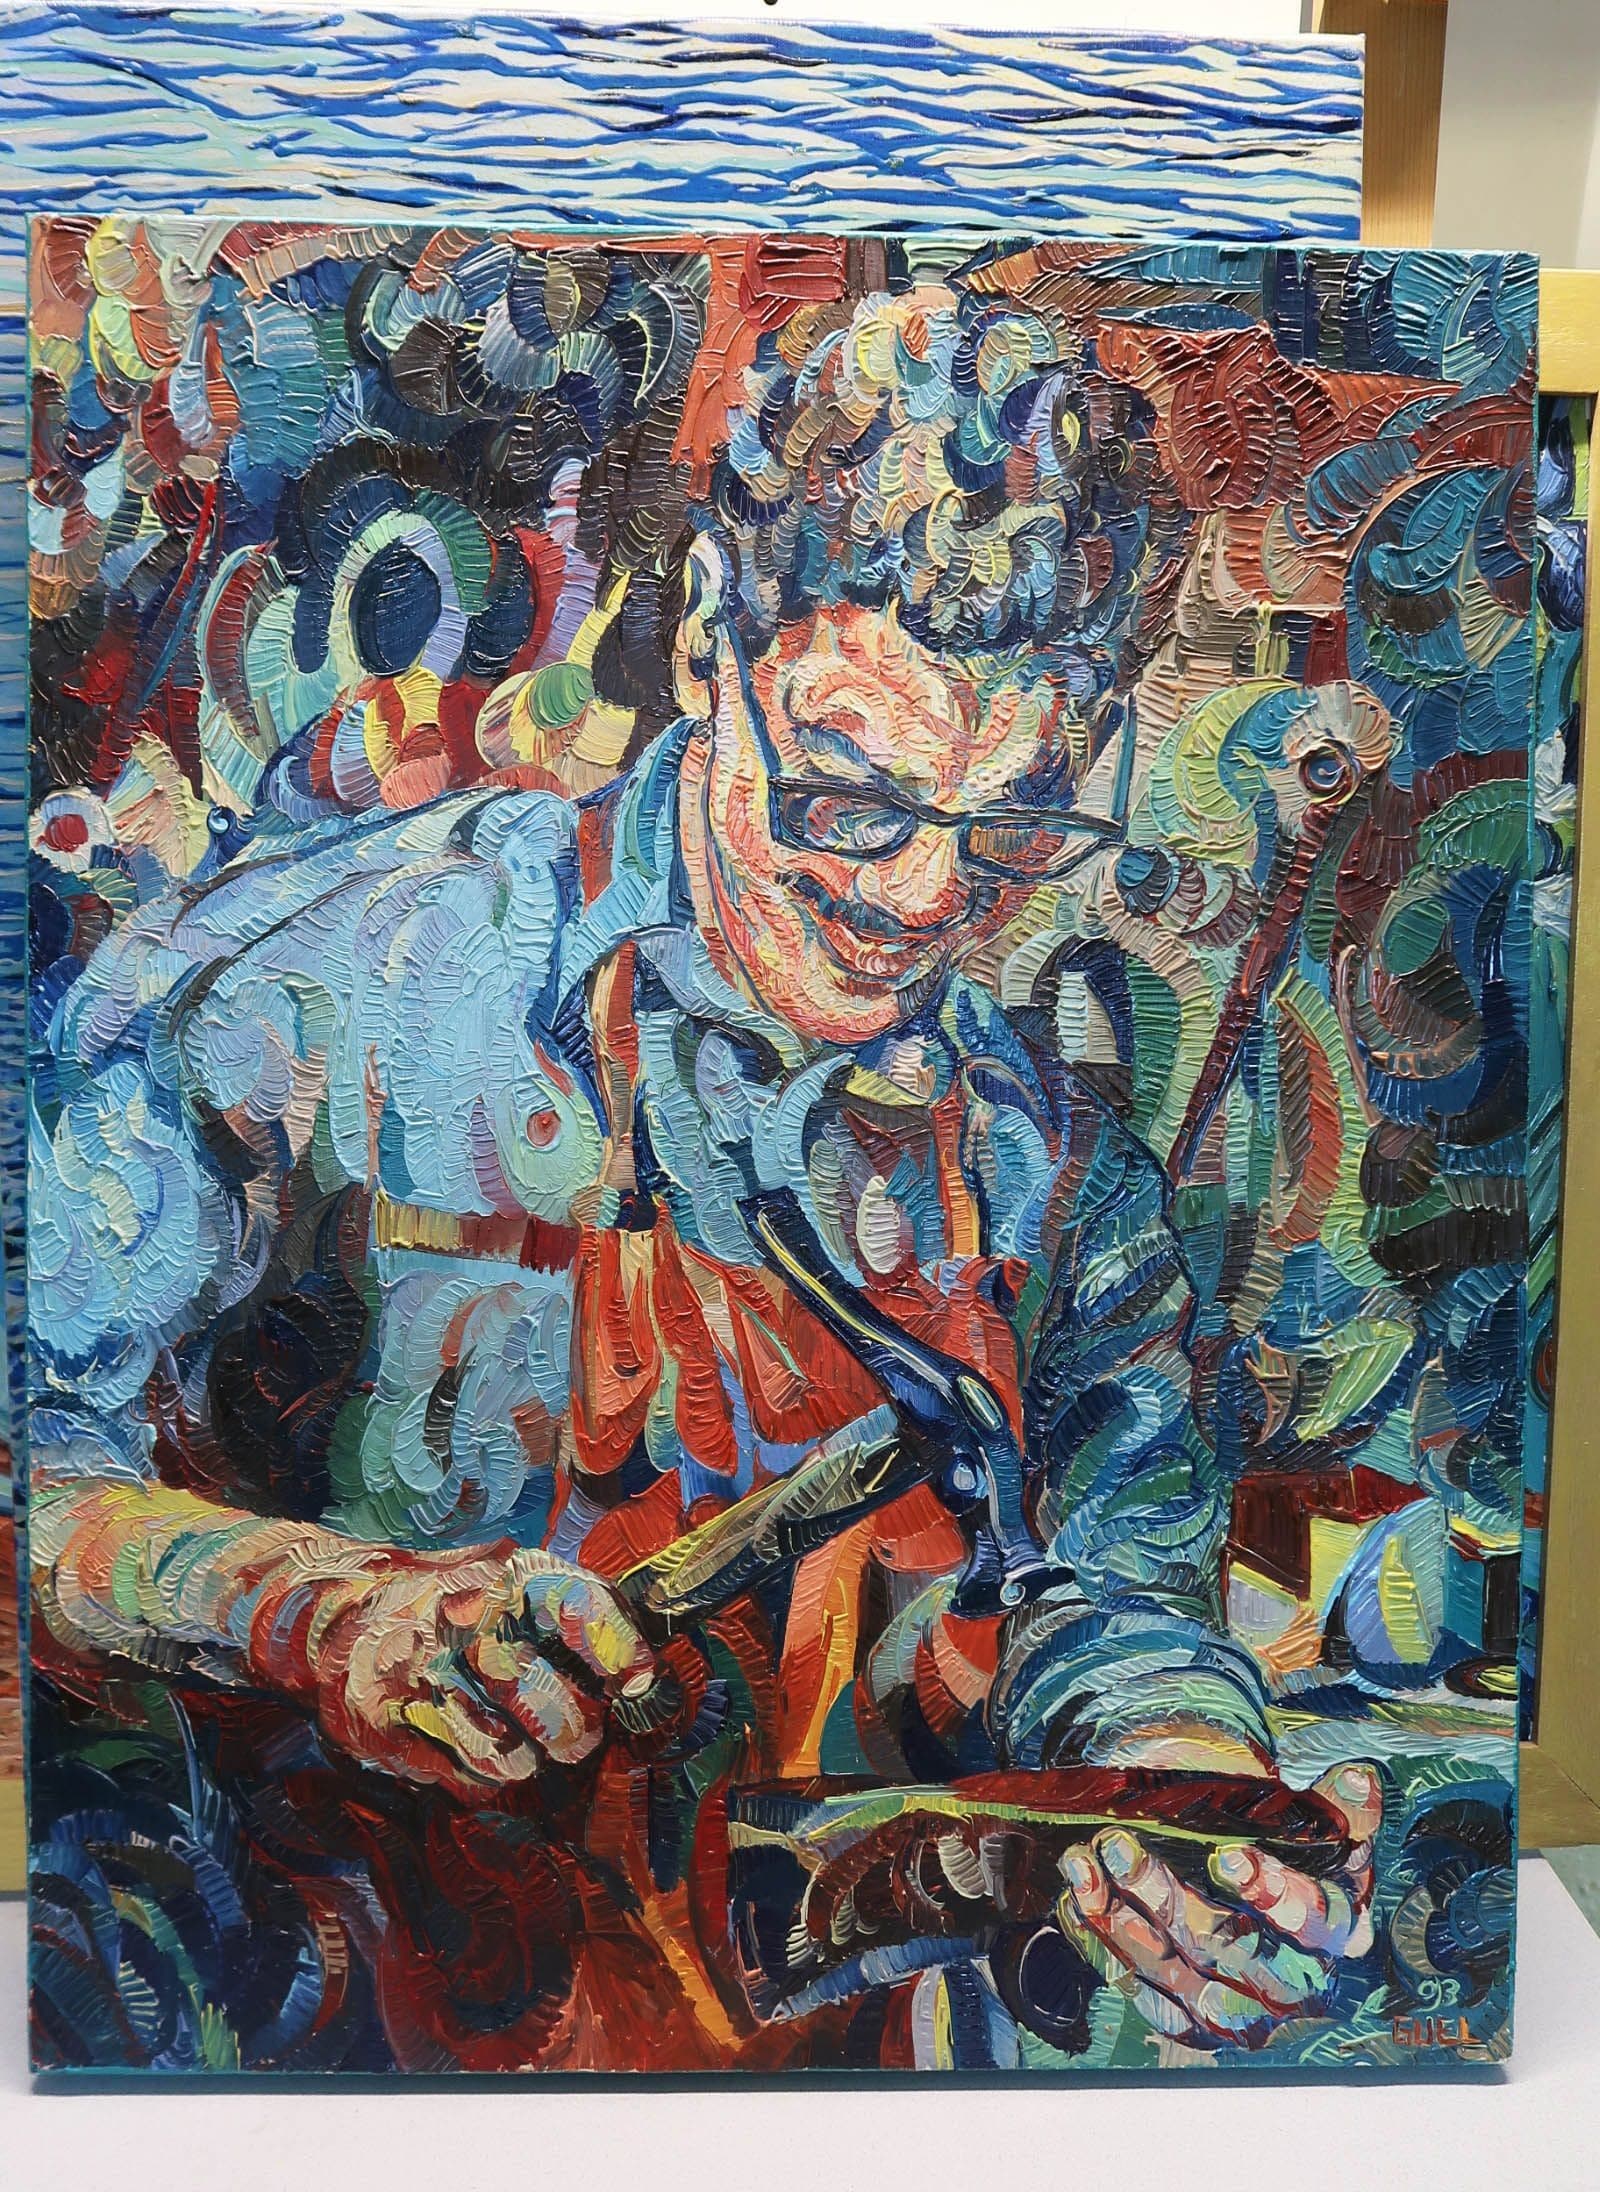 Painting of the 1993 authentic original Sapateiro showing off the texture